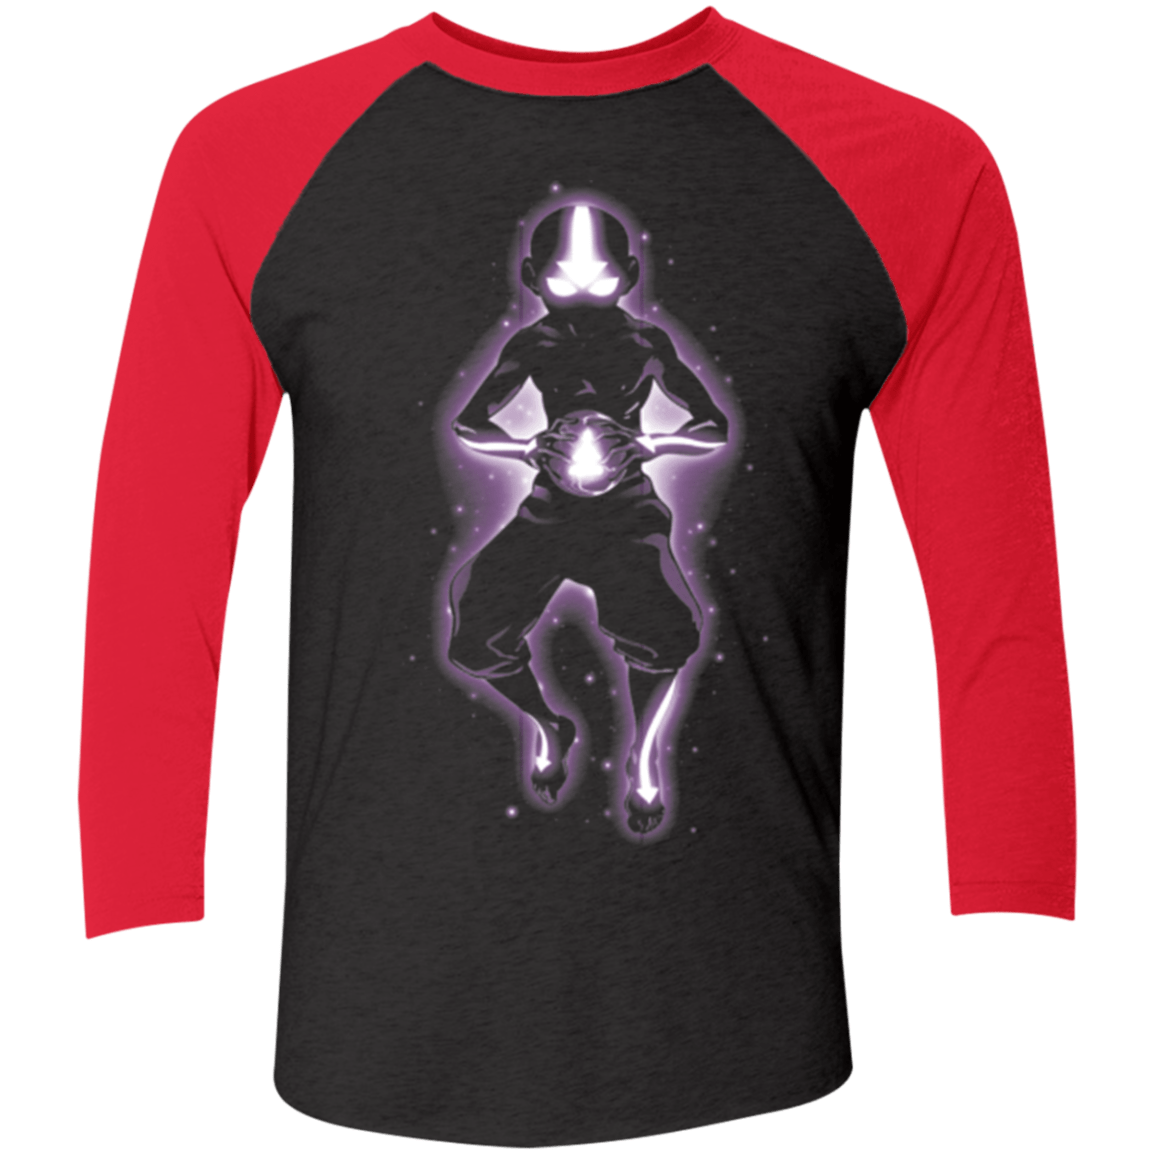 T-Shirts Vintage Black/Vintage Red / X-Small Pure Cosmic Energy Men's Triblend 3/4 Sleeve